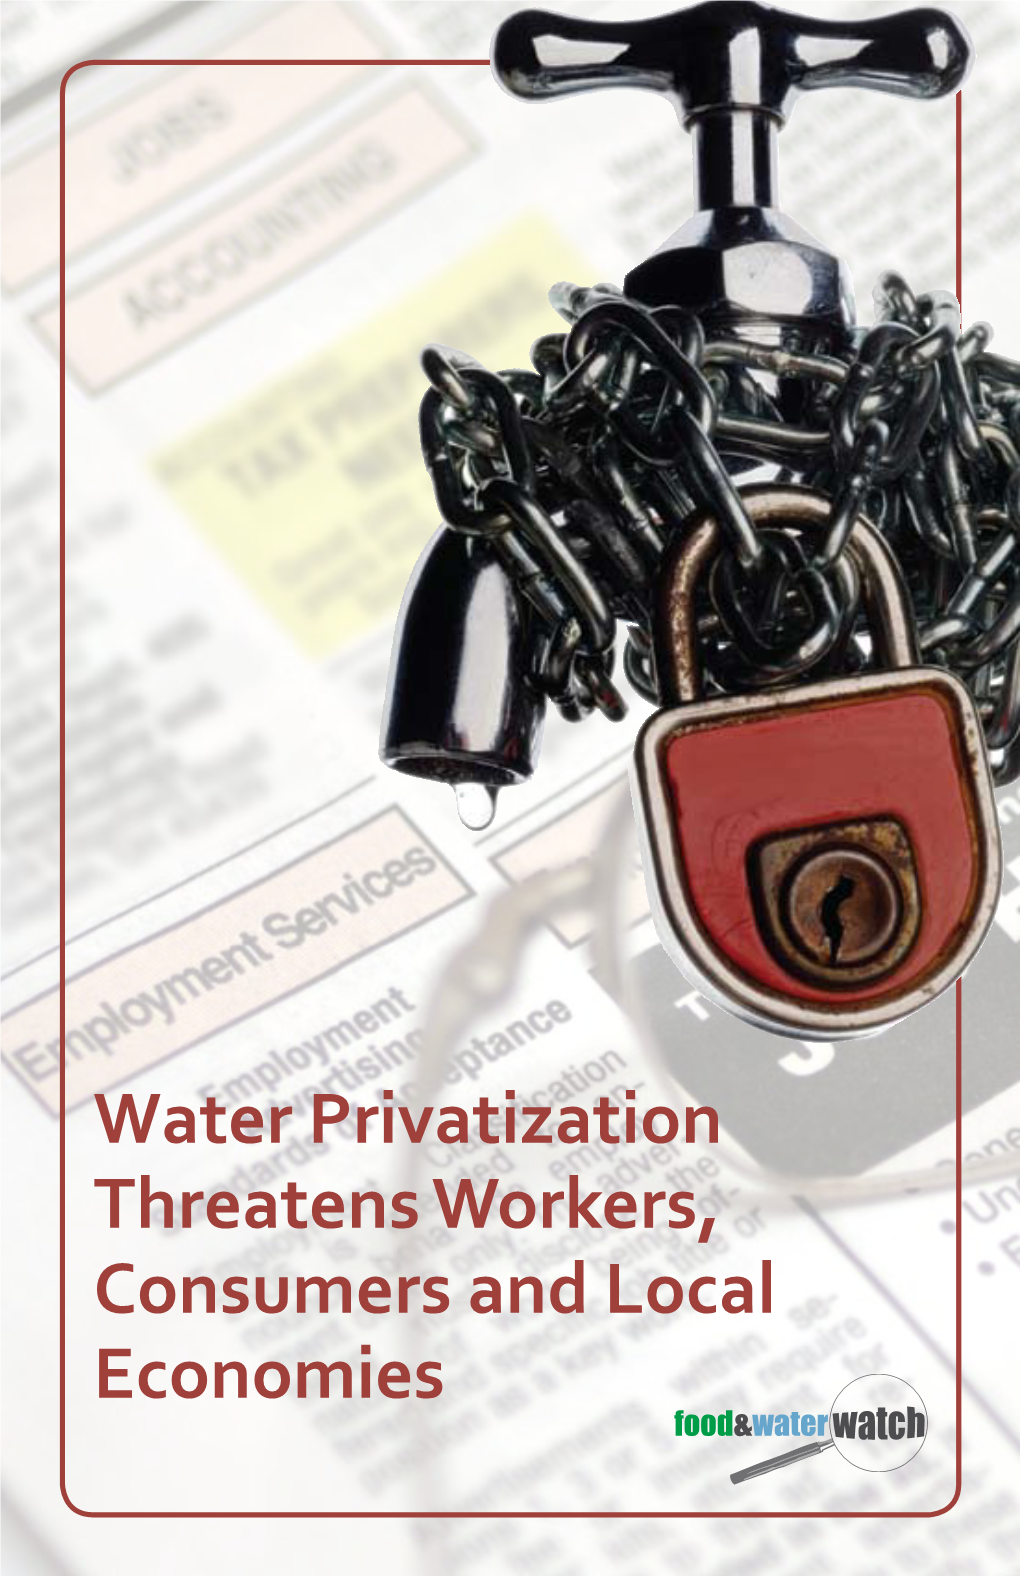 Water Privatization Threatens Workers, Consumers and Local Economies “The American Labor Movement Has Consistently Demonstrated Its Devotion to the Public Interest